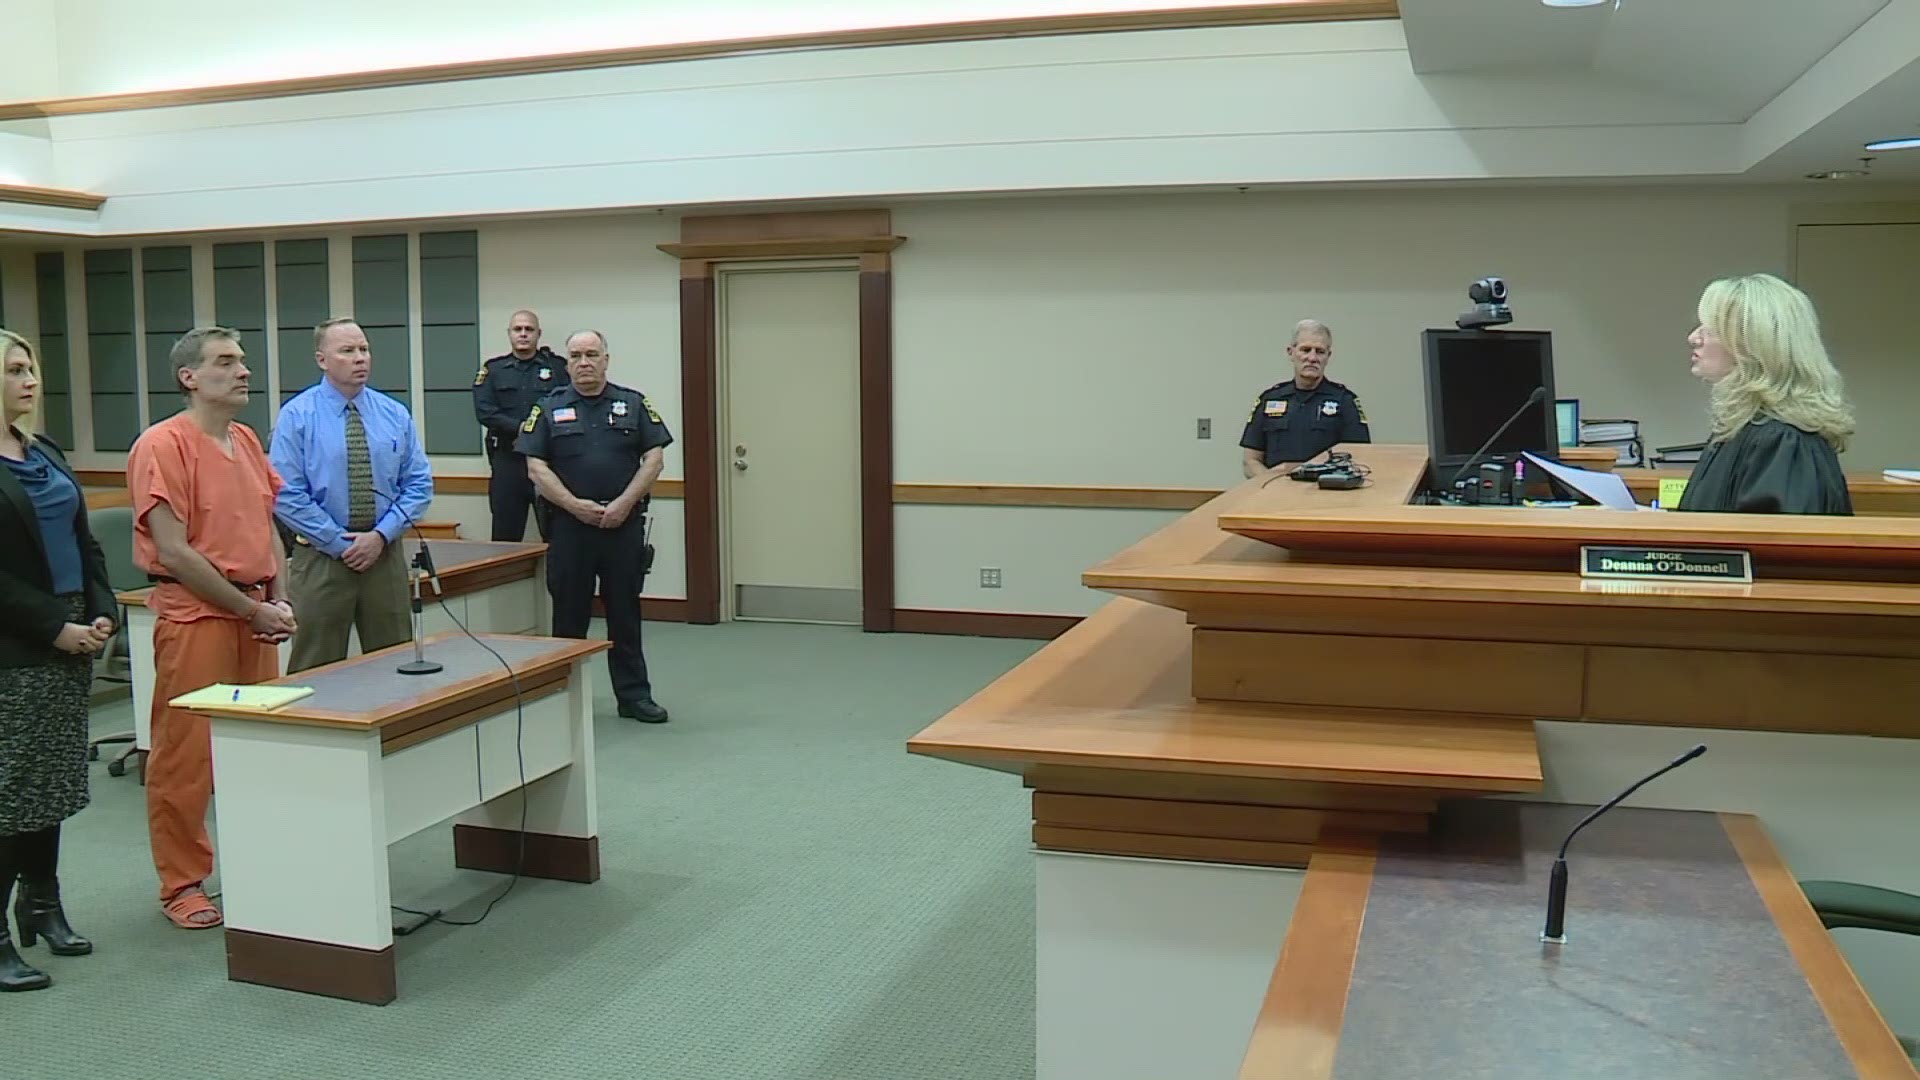 Son charged in murder of parents in North Royalton appears in court